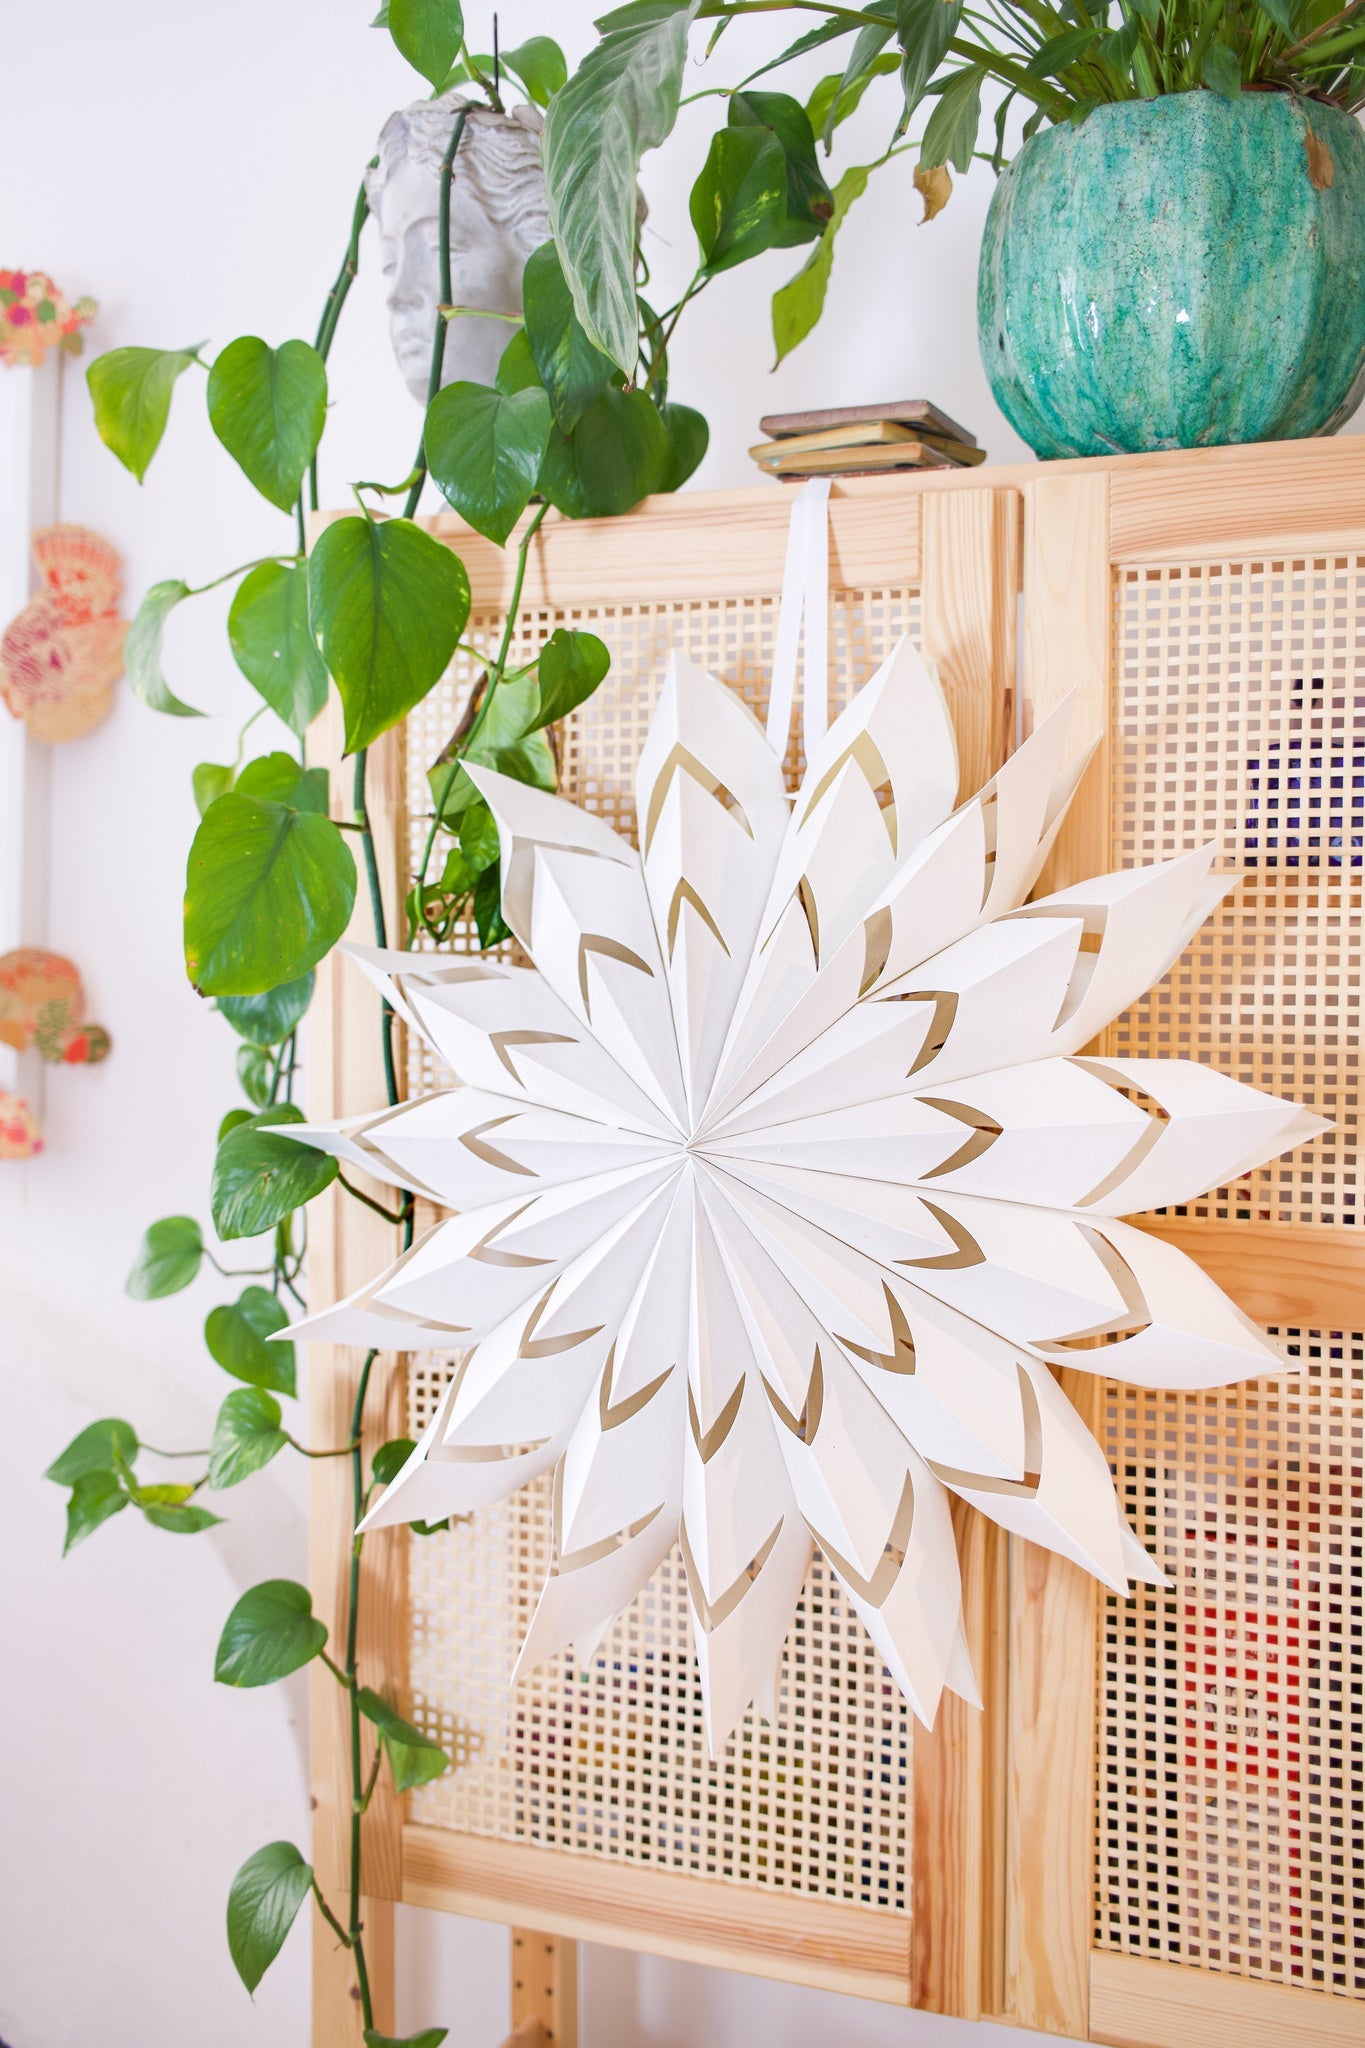 Large White Paper Star